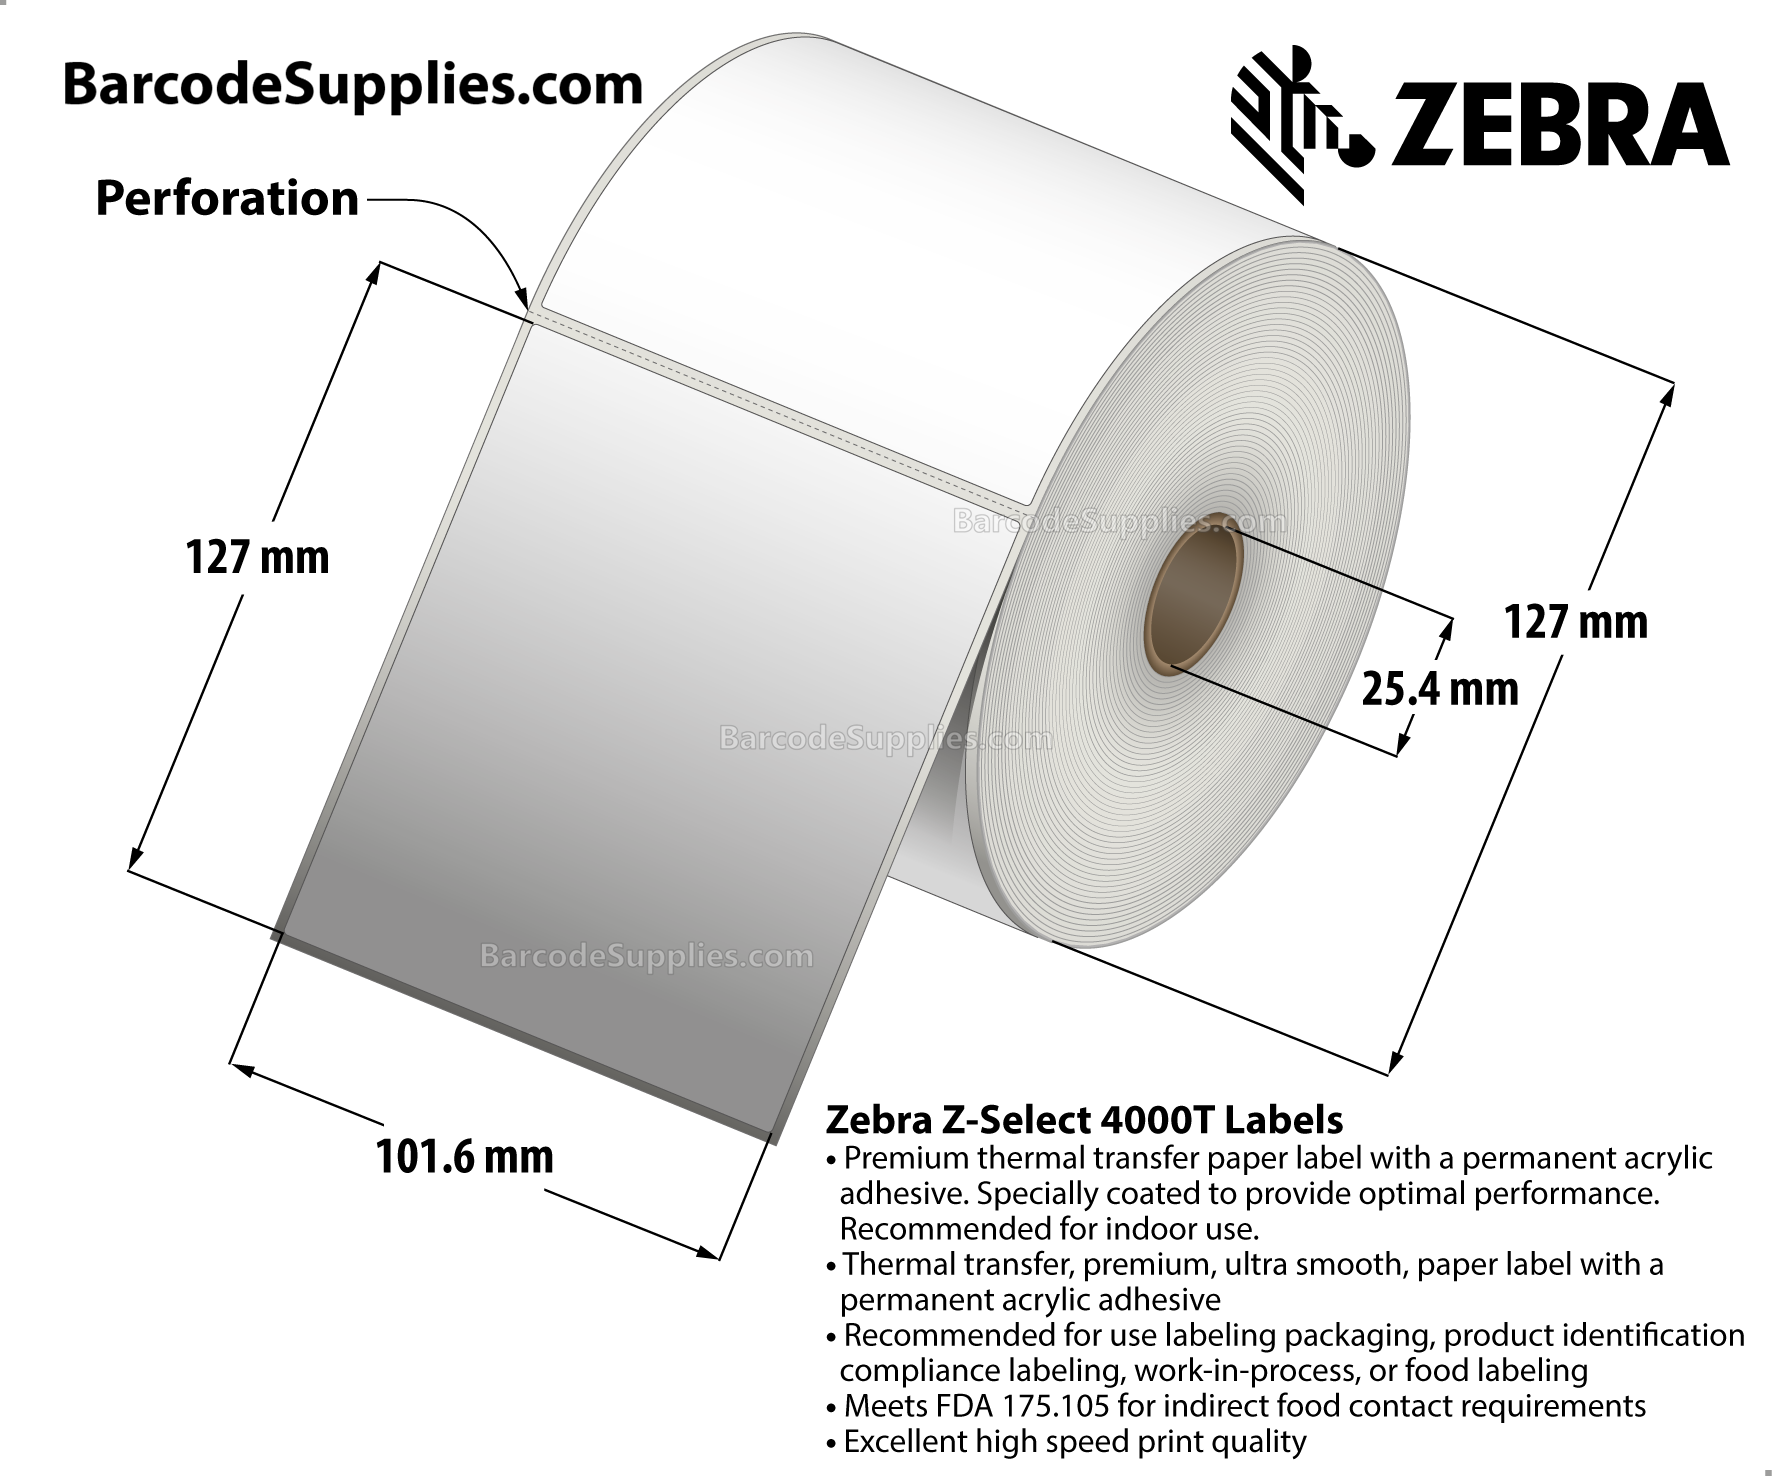 4 x 5 Thermal Transfer White Z-Select 4000T Labels With Permanent Adhesive - Perforated - 570 Labels Per Roll - Carton Of 6 Rolls - 3420 Labels Total - MPN: 10009531